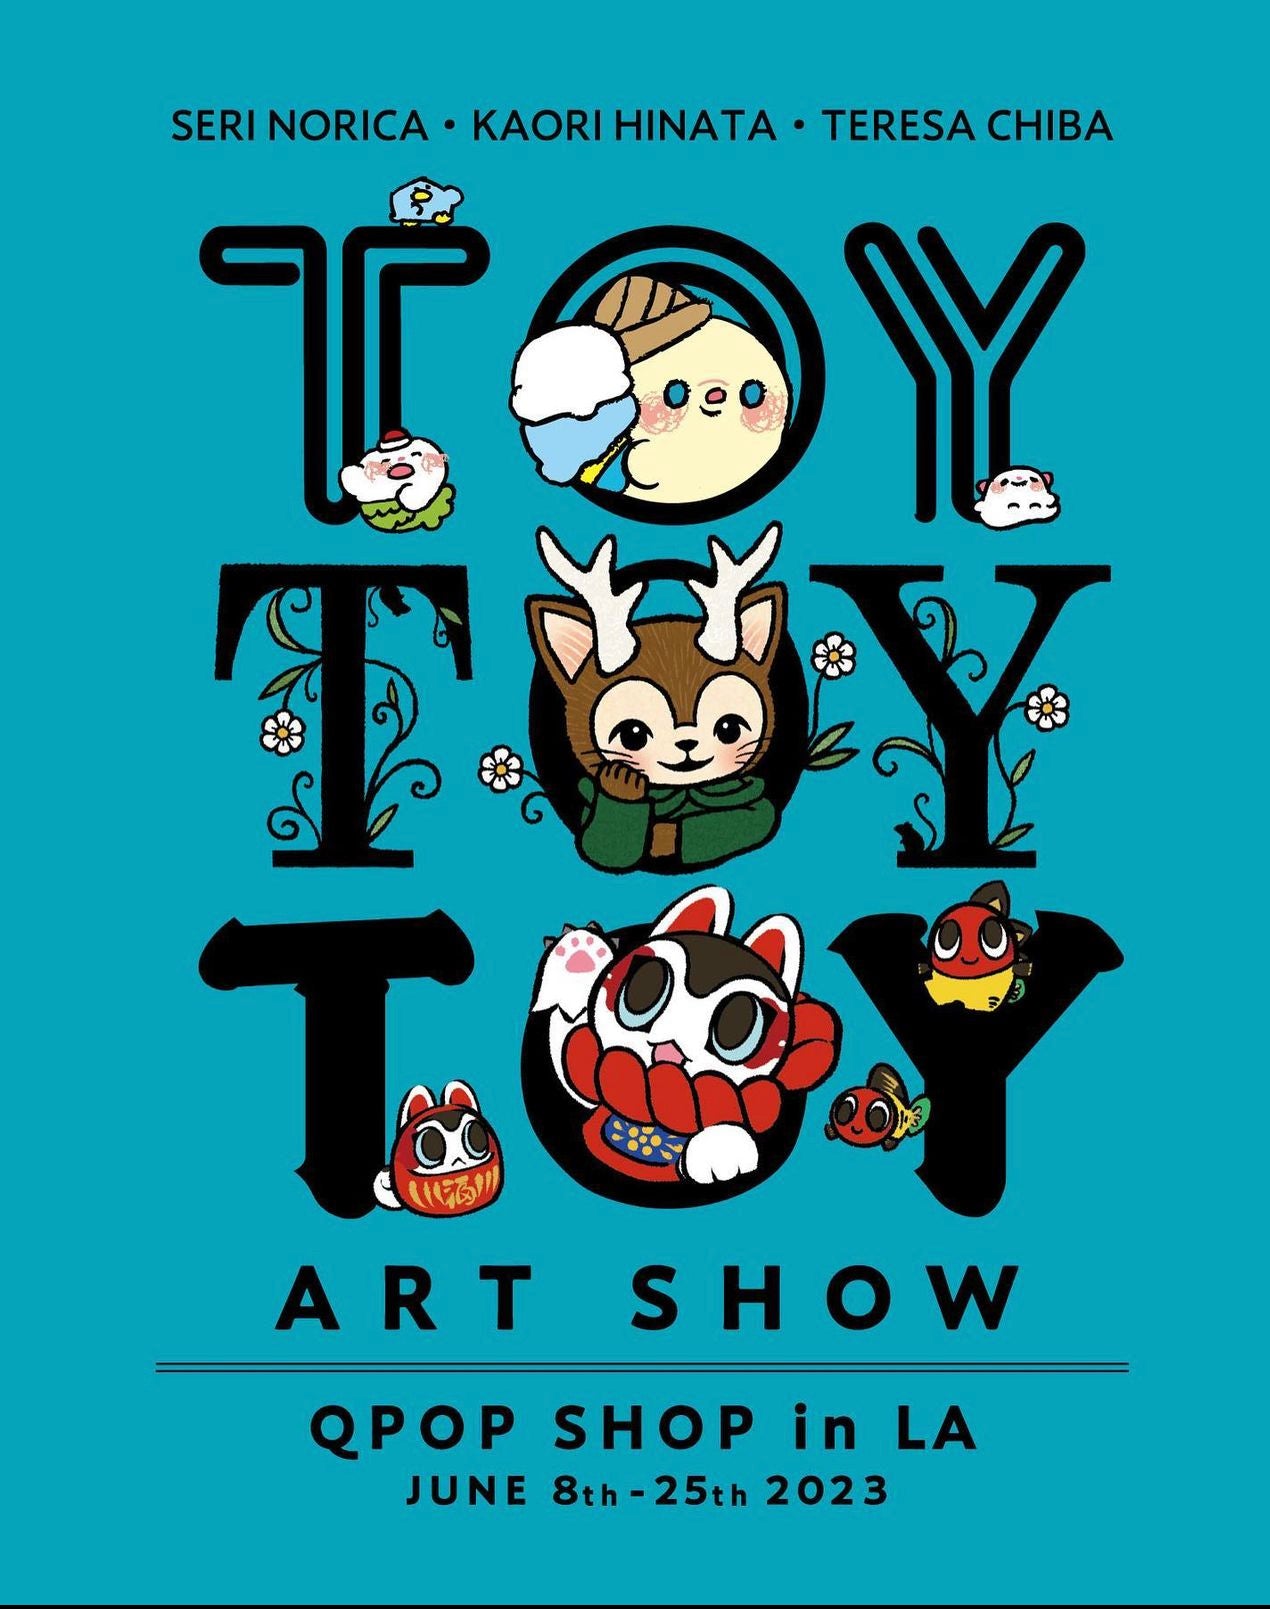 Toy Toy Toy Art Show Signed Poster - Morris, Inu Harigon & Kaiju Icy - Toy Toy Toy Art Show